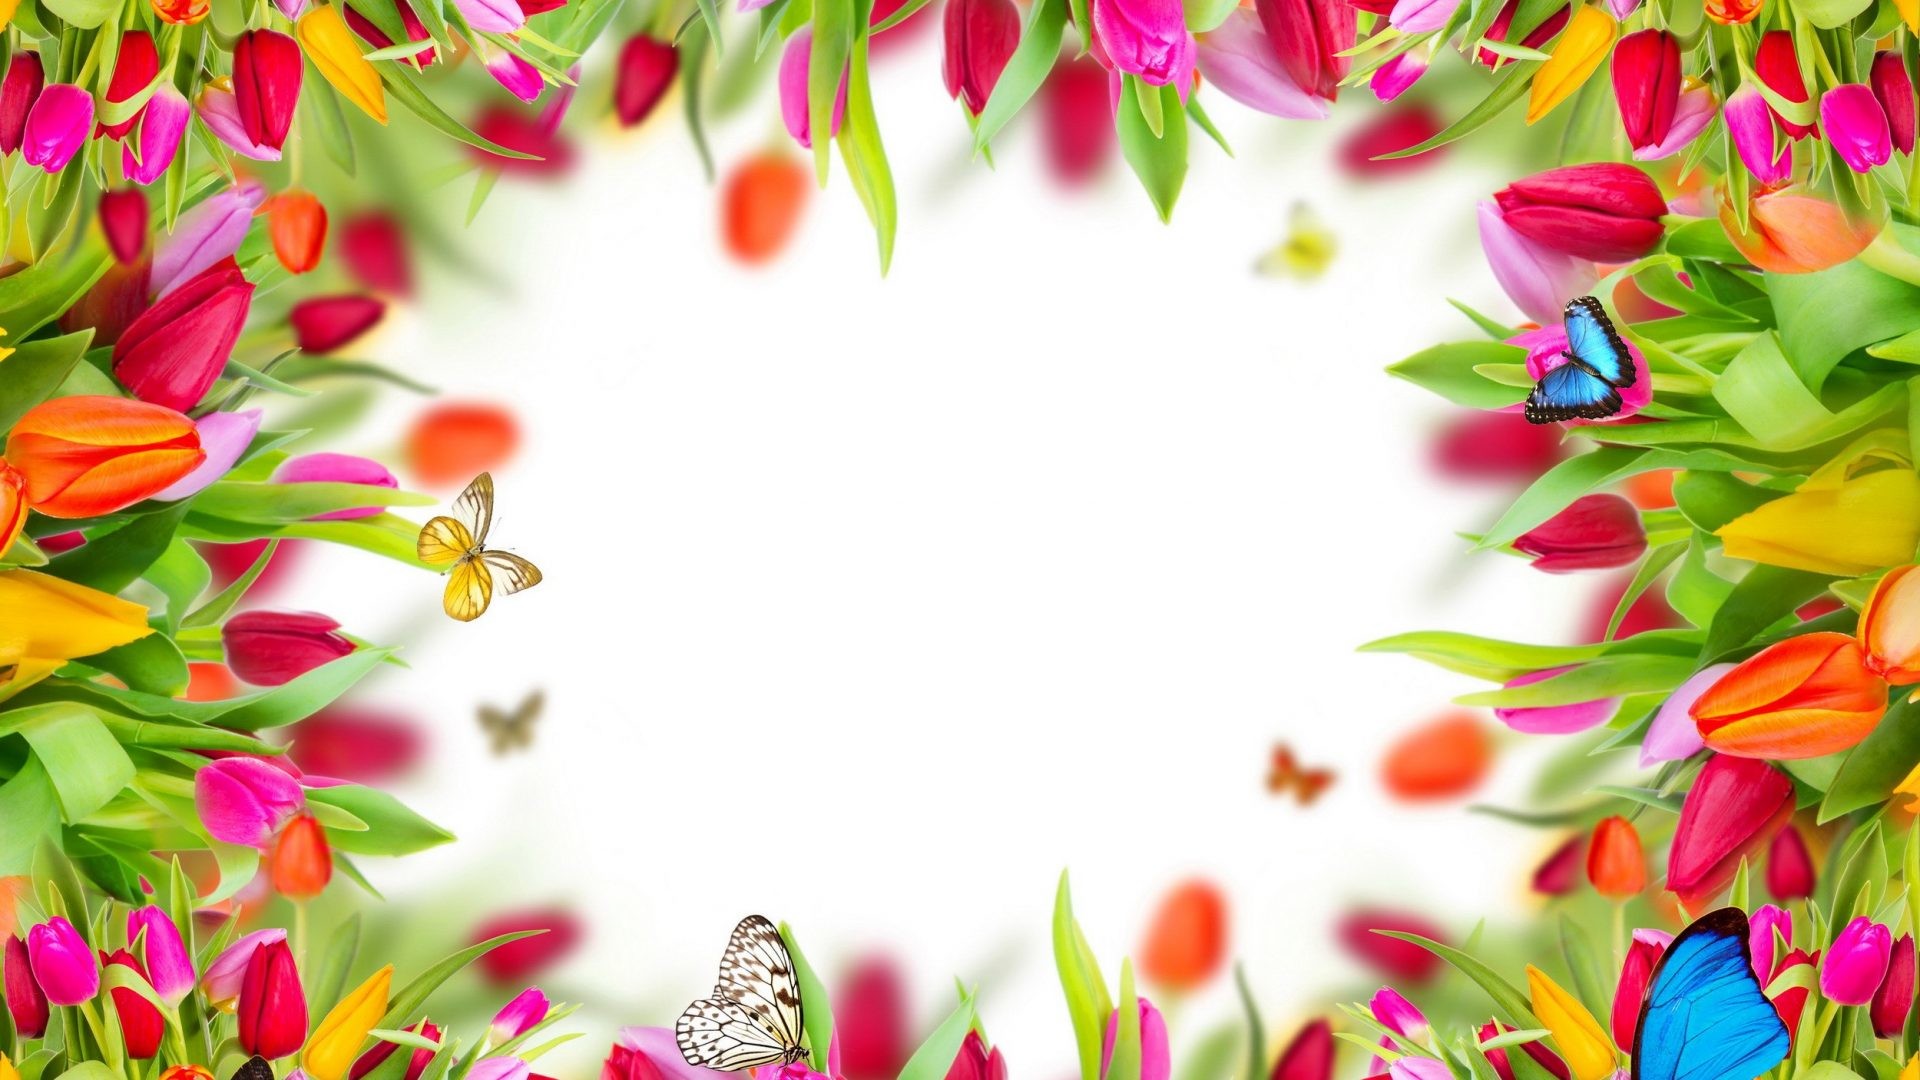 Spring Flowers Tulips Frame Butterflies Colorful Desktop Backgrounds 2500x2300 1920x1080